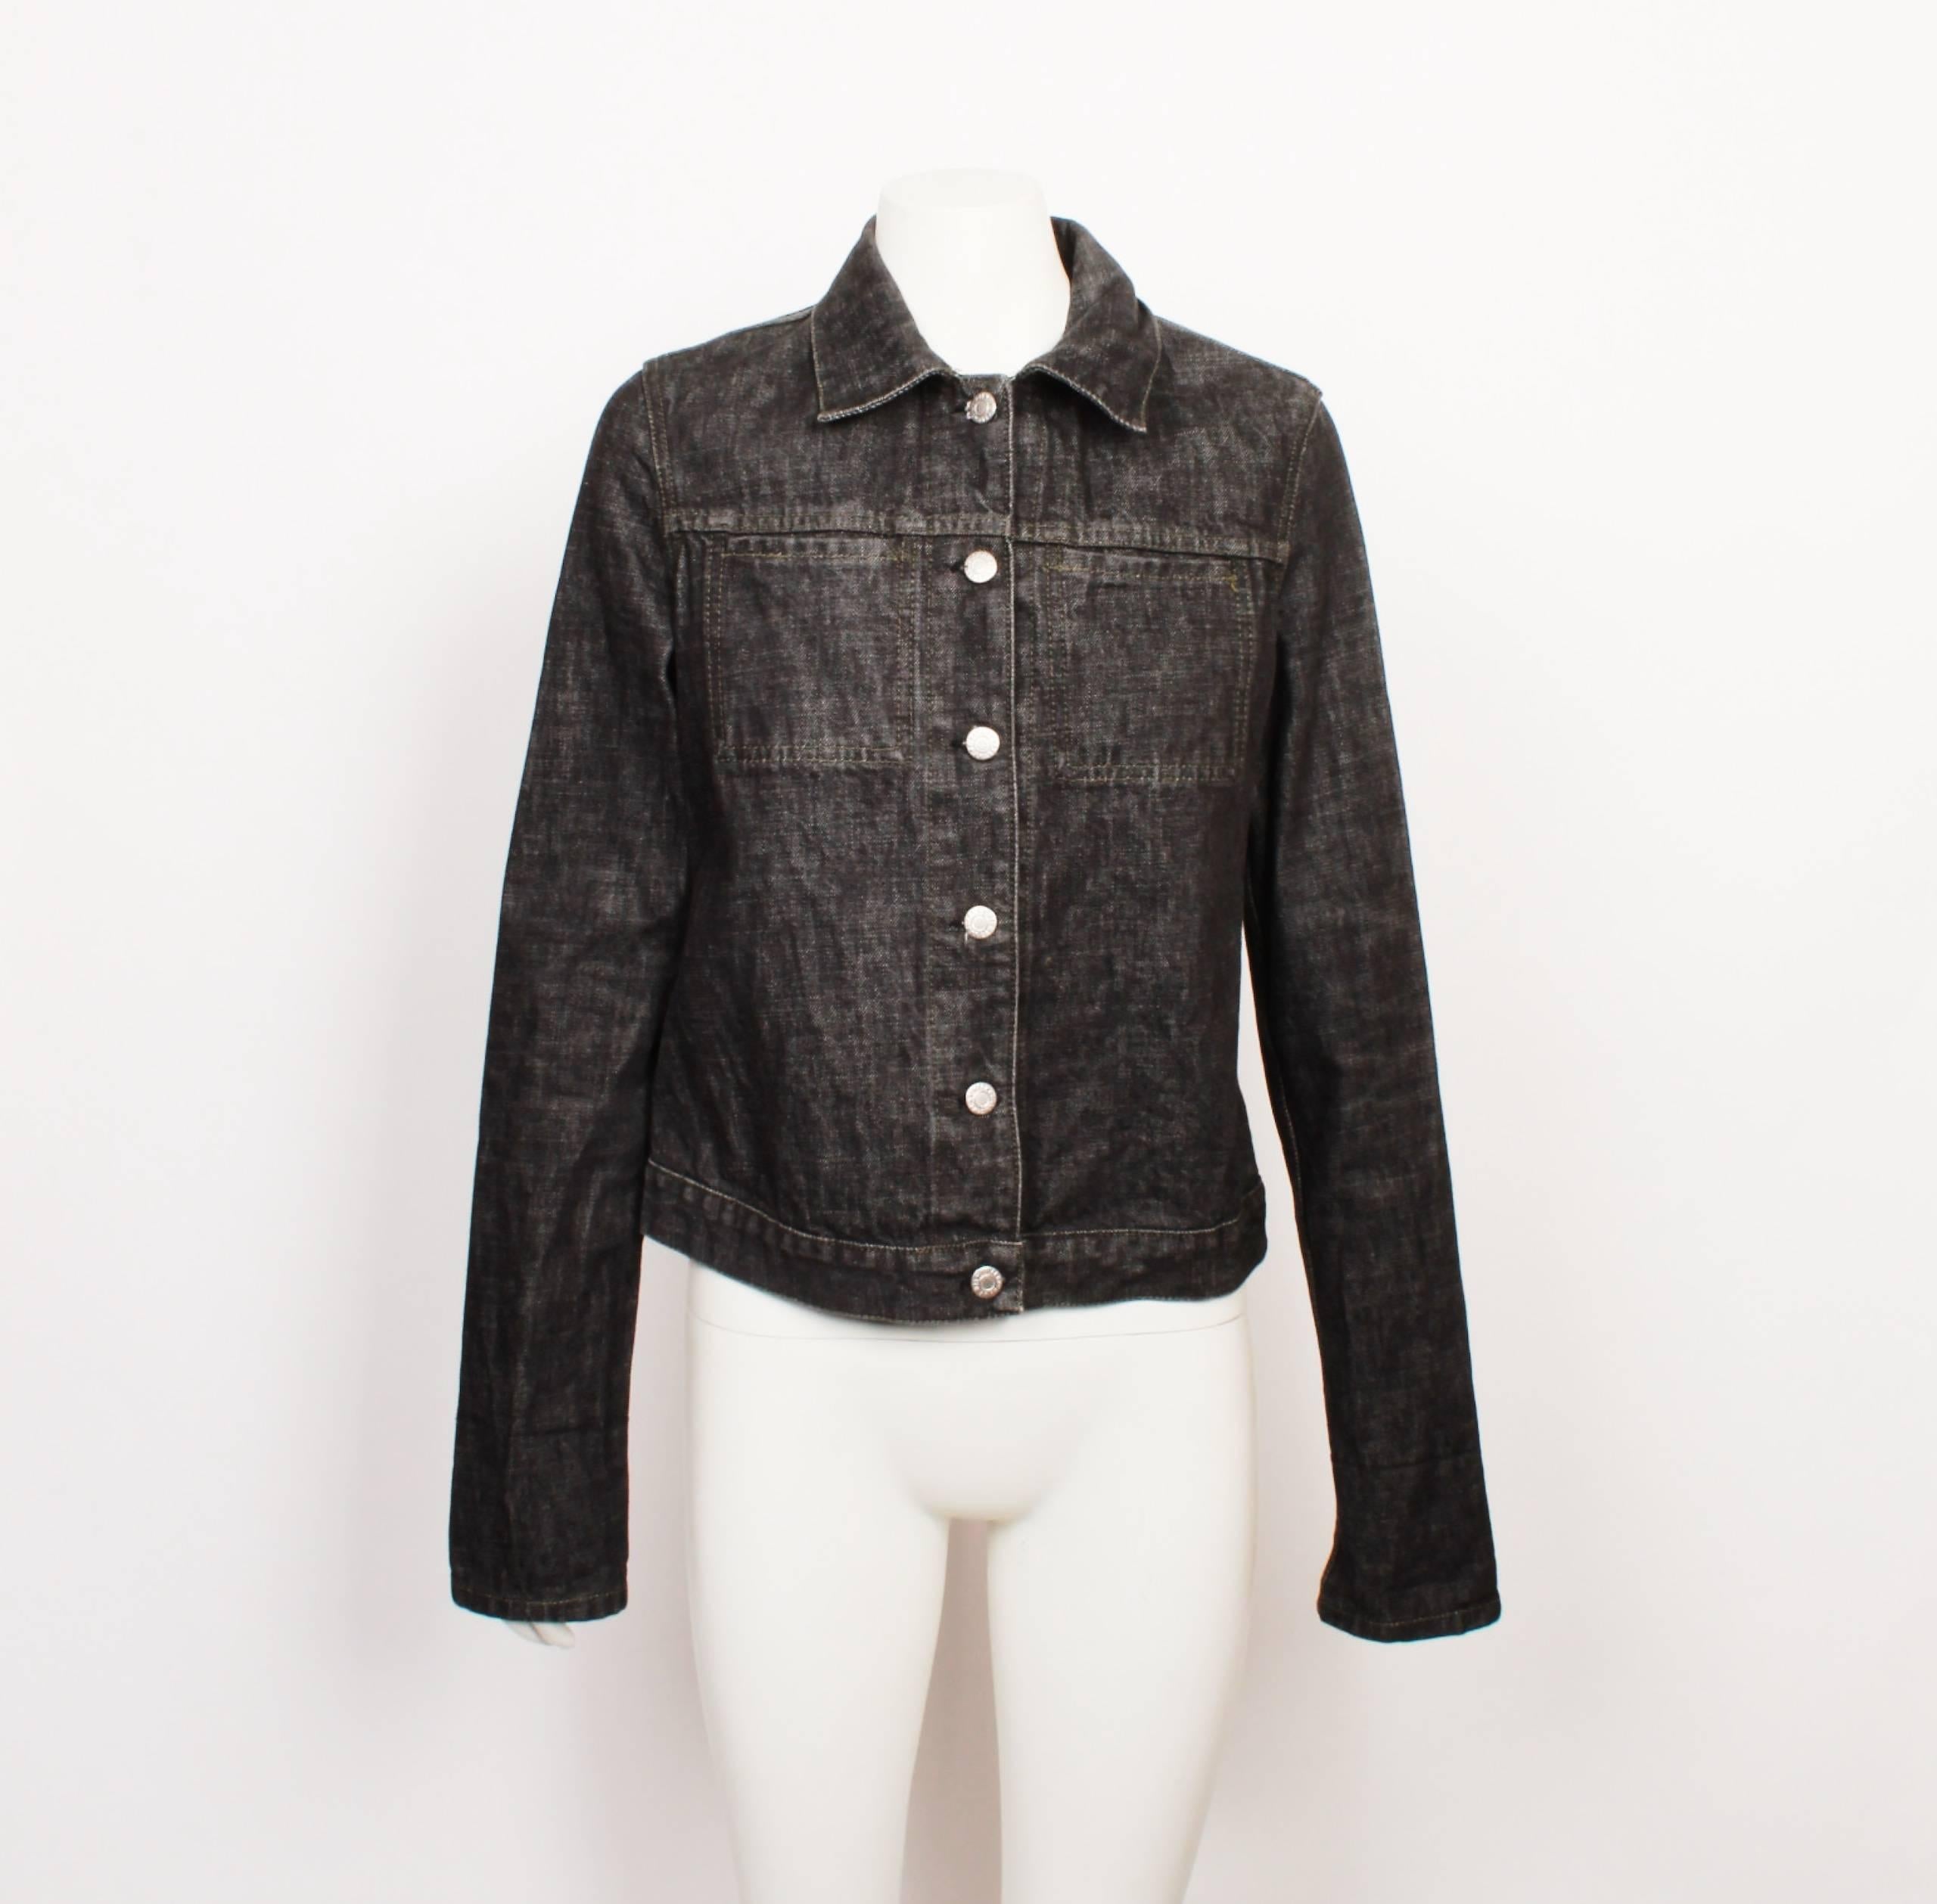 Slim, two pocket denim bomber jacket.

A master of minimalism, merging feminine and masculine elements, sharp cuts and urban prints, Helmut Lang defined the nineties with a less-is-more outlook on modern dressing and remains a master of the